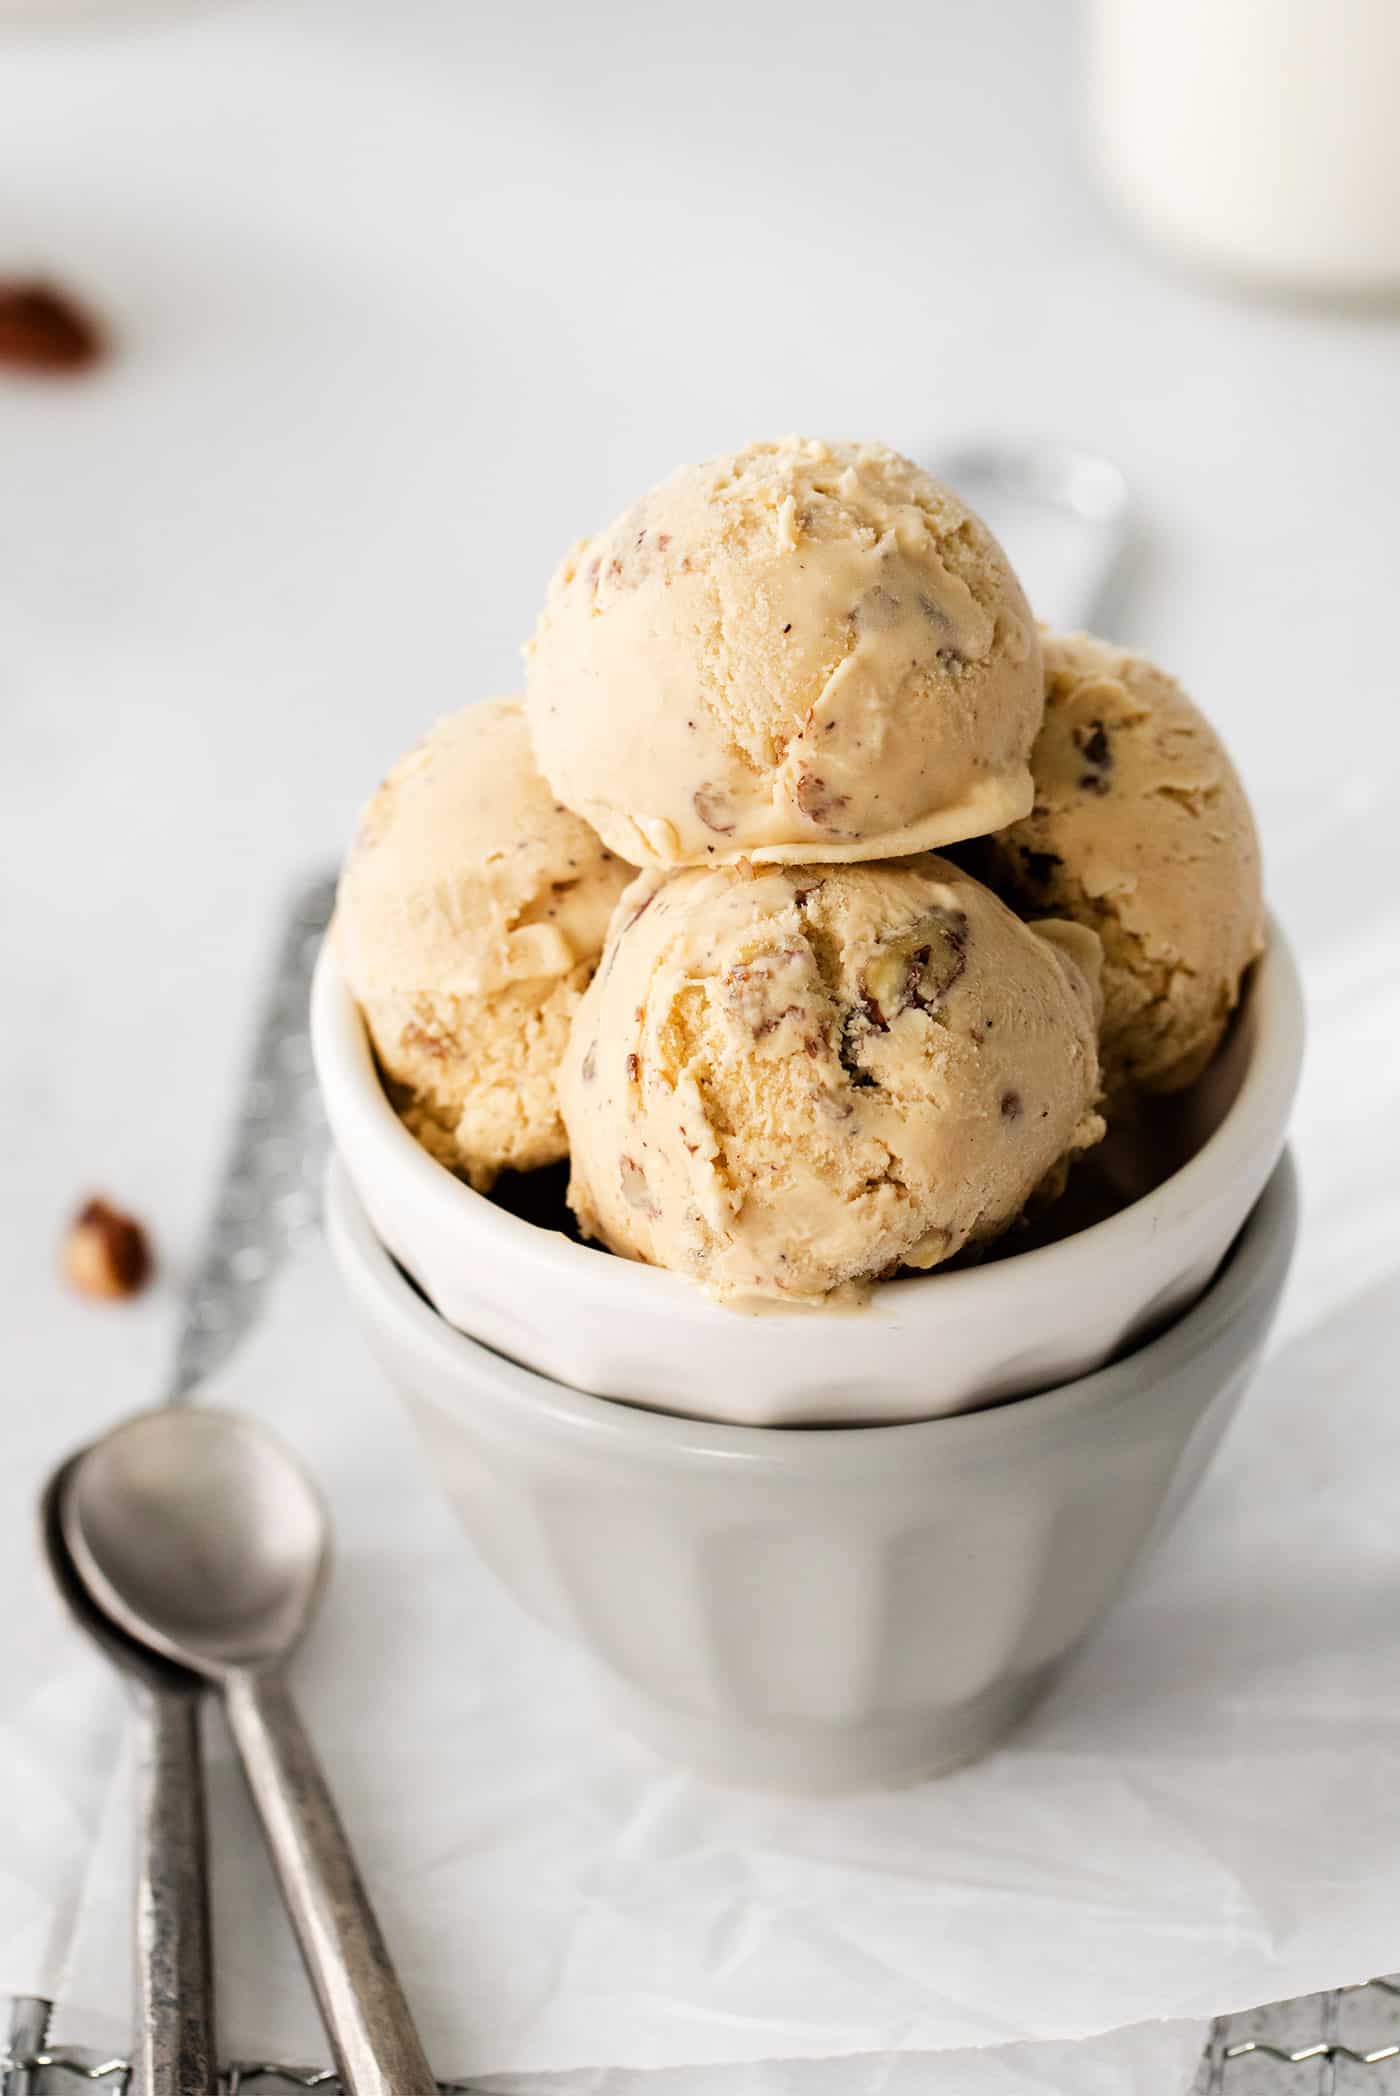 Four scoops of butter pecan ice cream next to a spoon